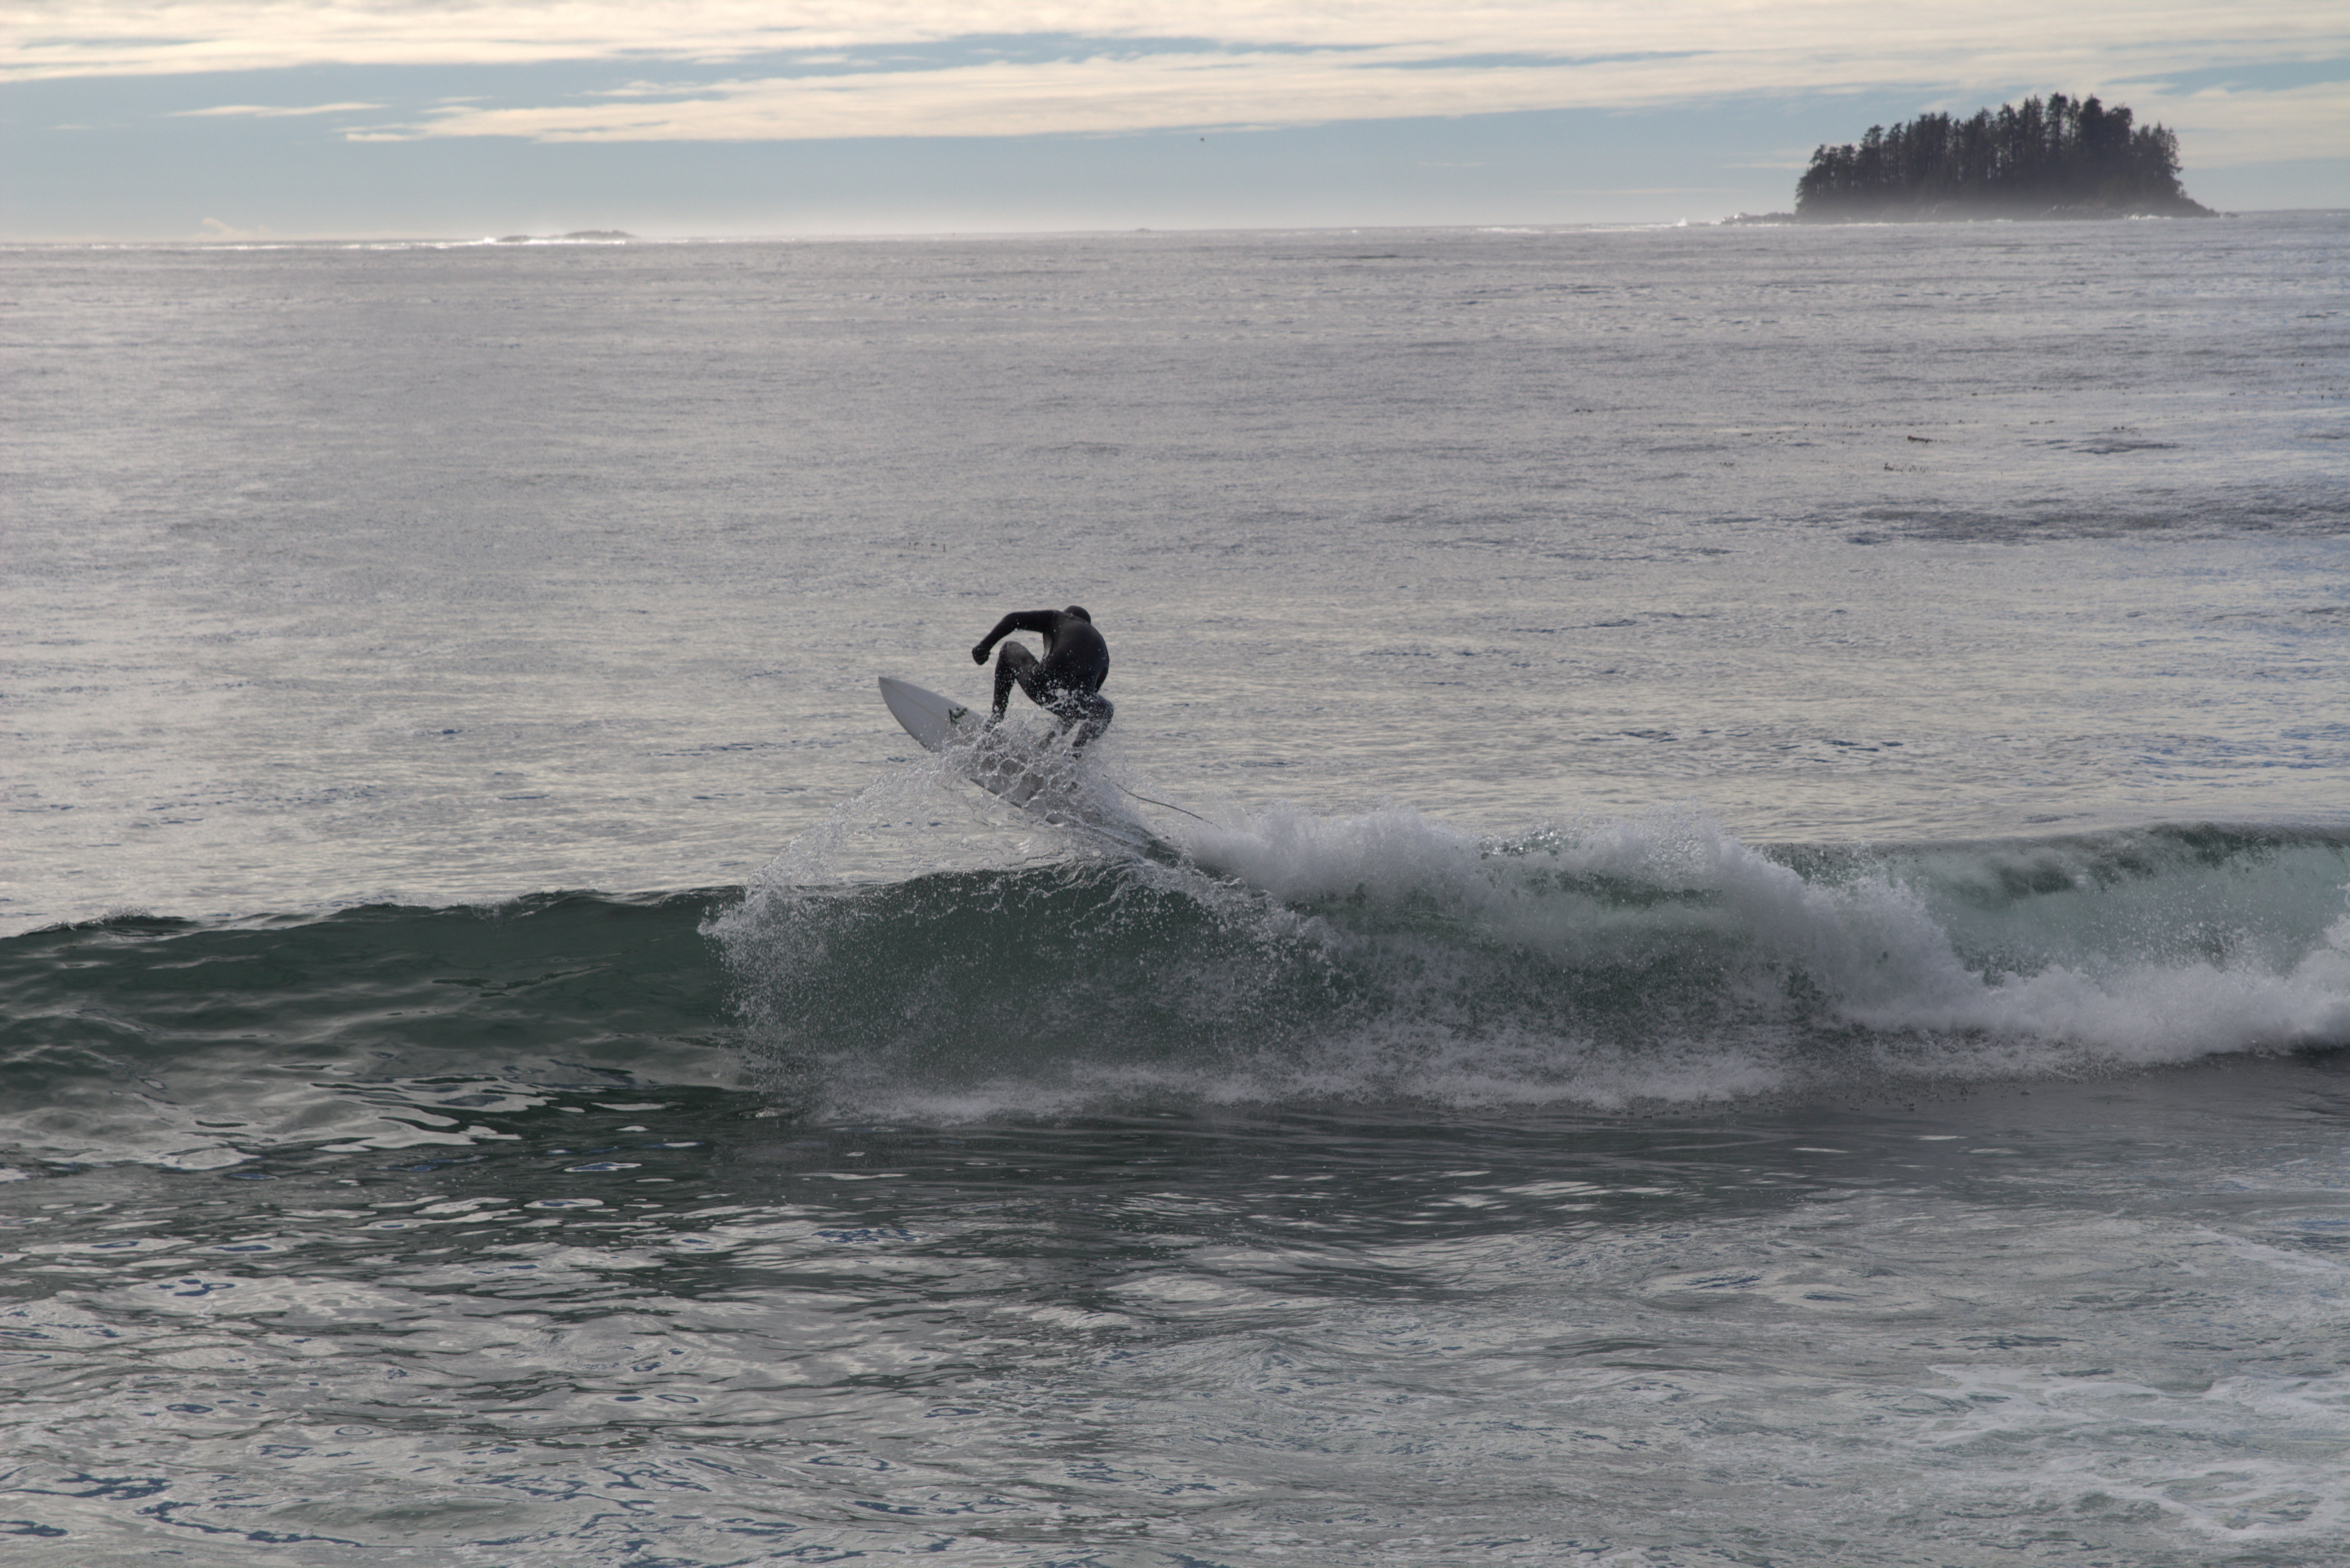 A surfer tucks a wave at Sandy Beach in Sitka. (Photo by Brielle Schaeffer,KCAW - Sitka)